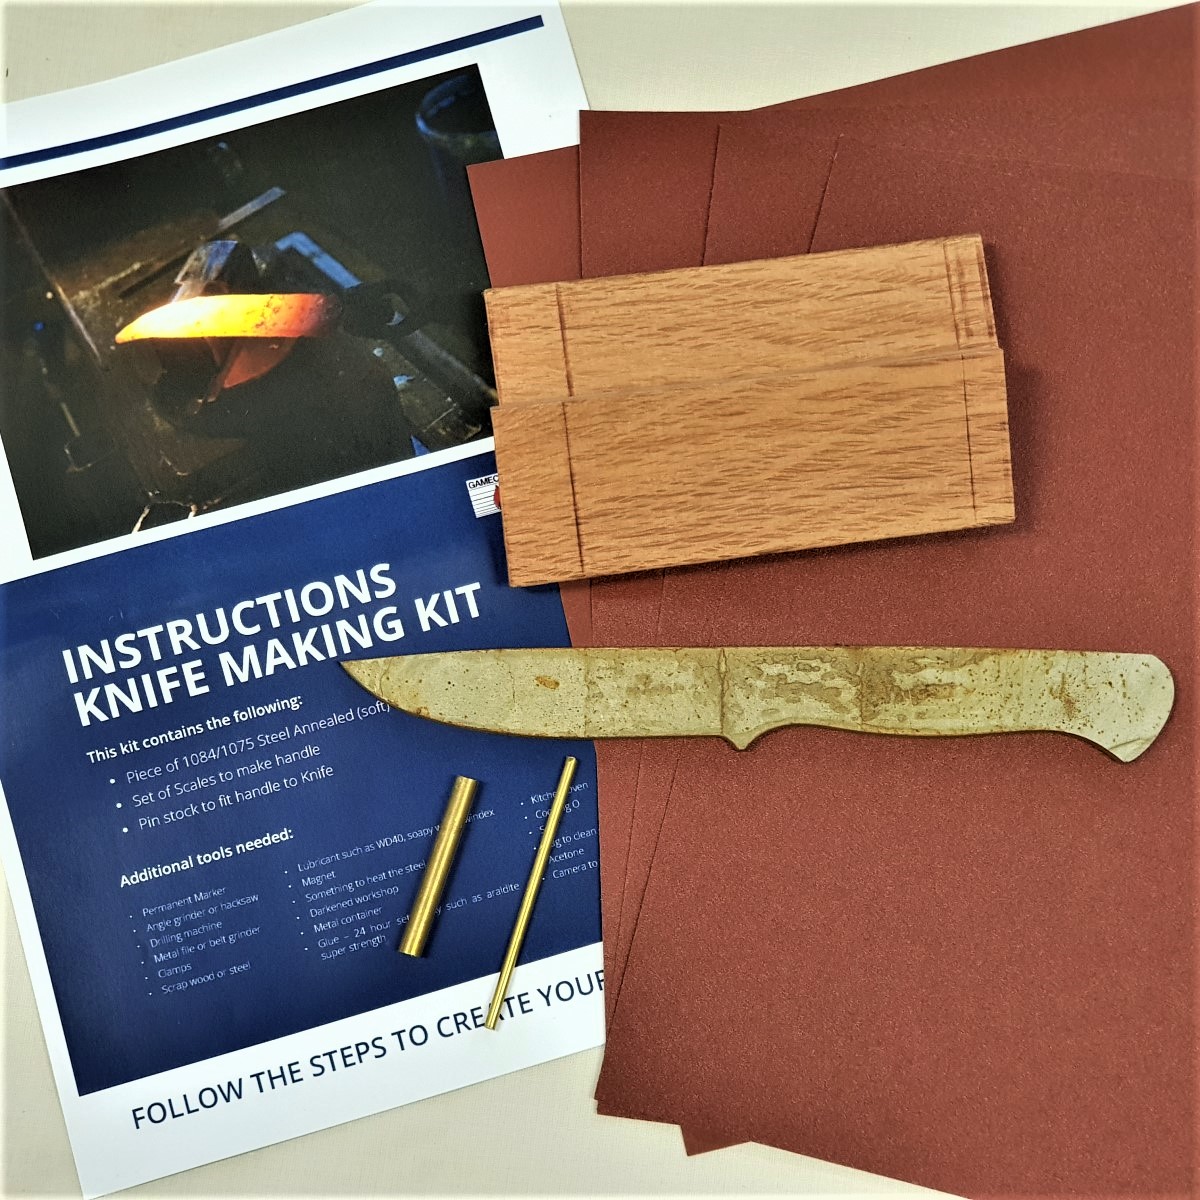 How to Make a Knife From a Kit